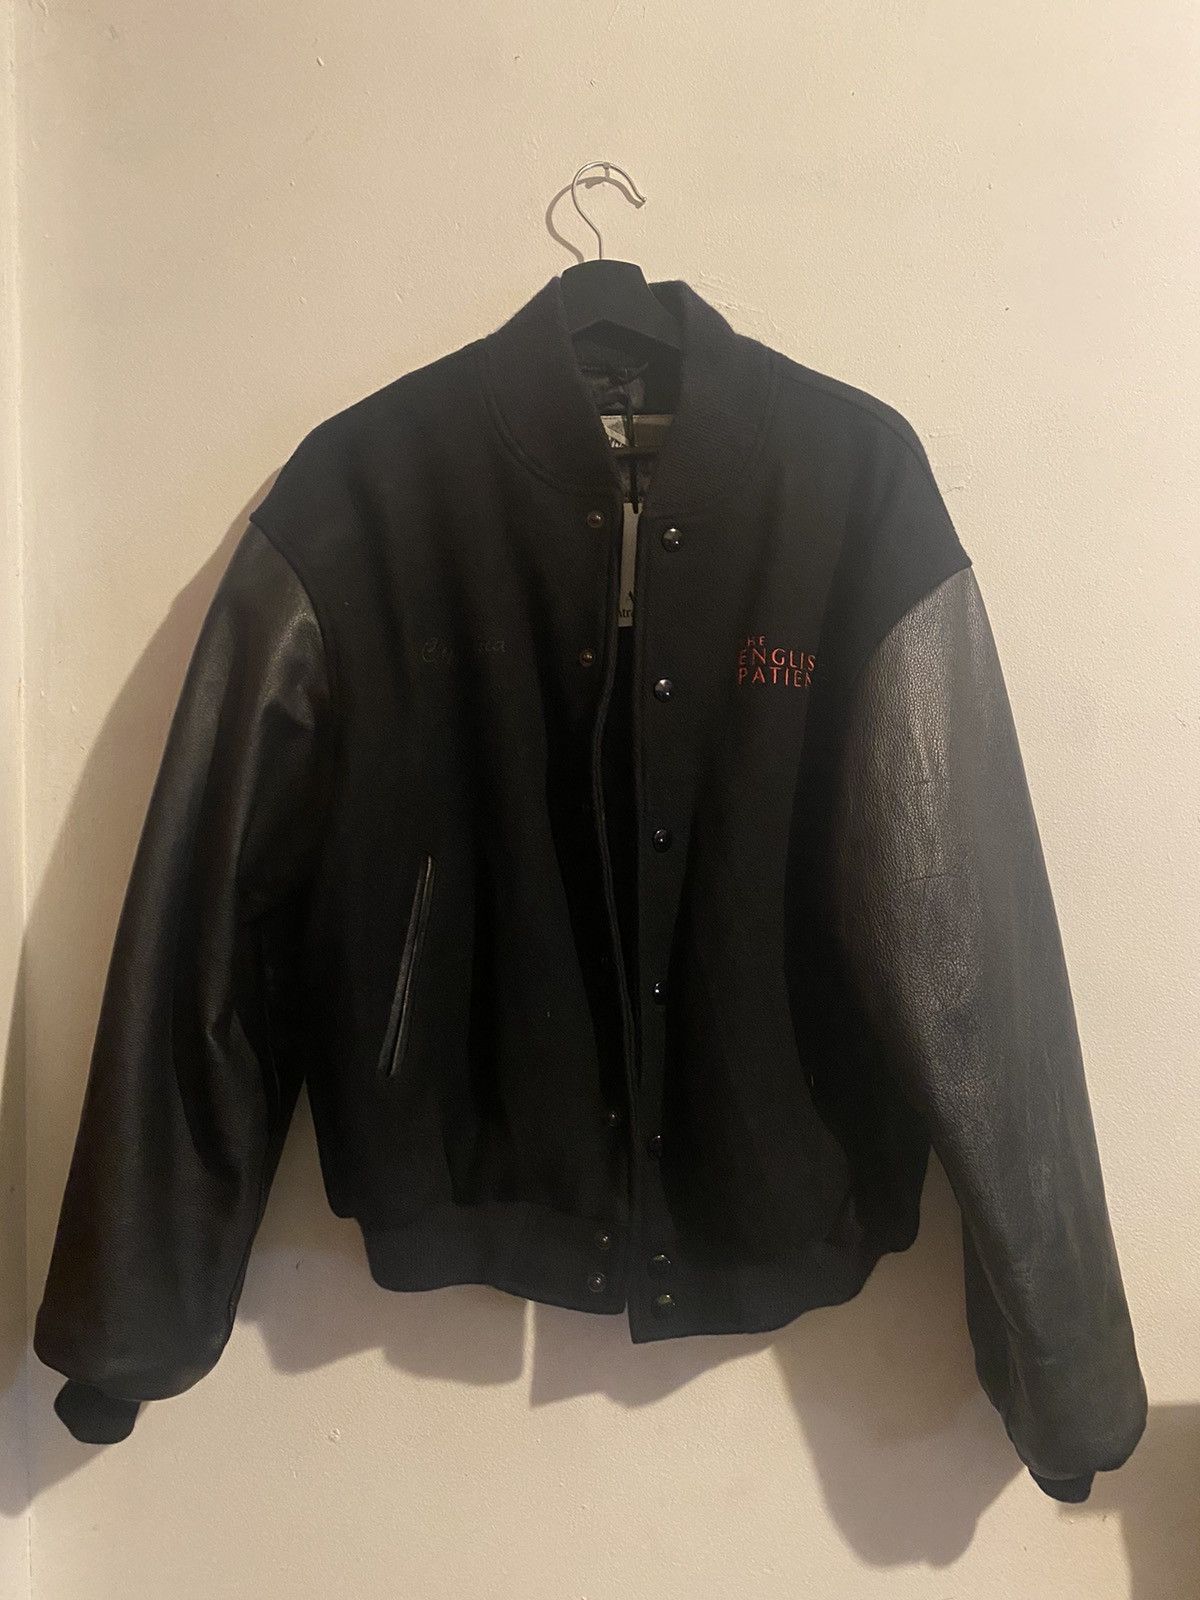 A24 The English Patient Leather Jacket | Grailed